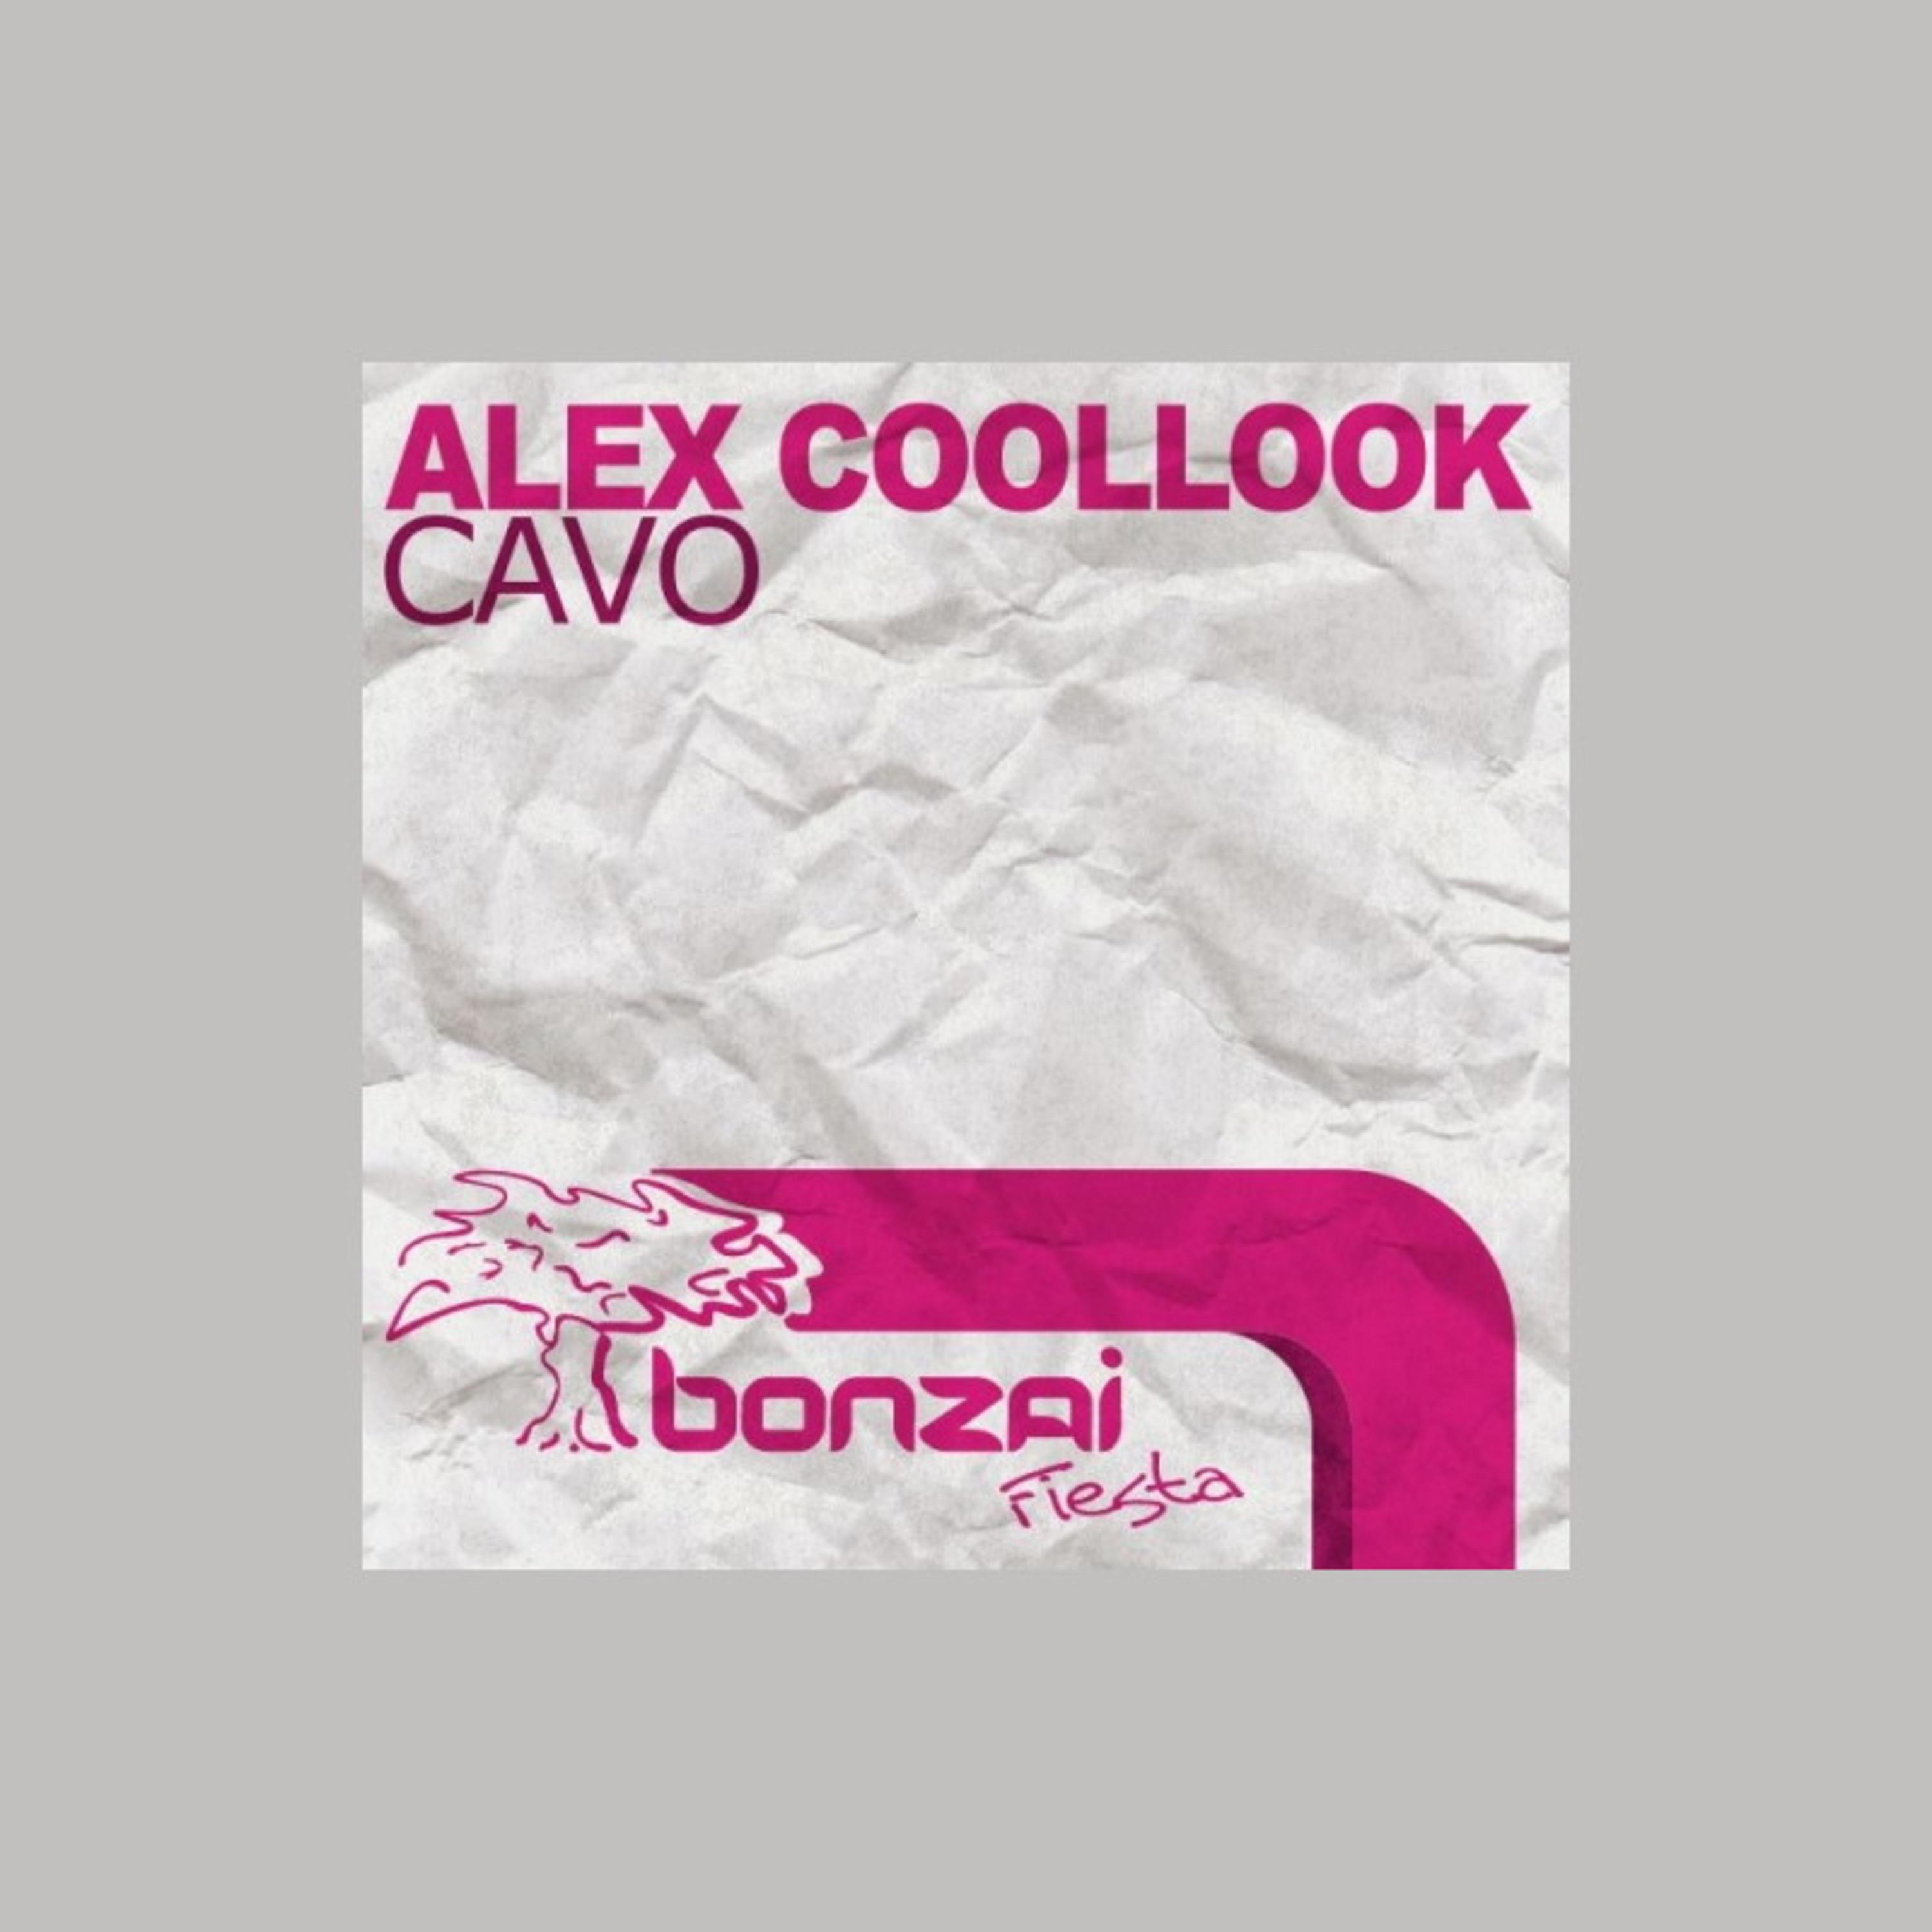 Alex Coollook - Cavo (Orelse Boosted Remix)